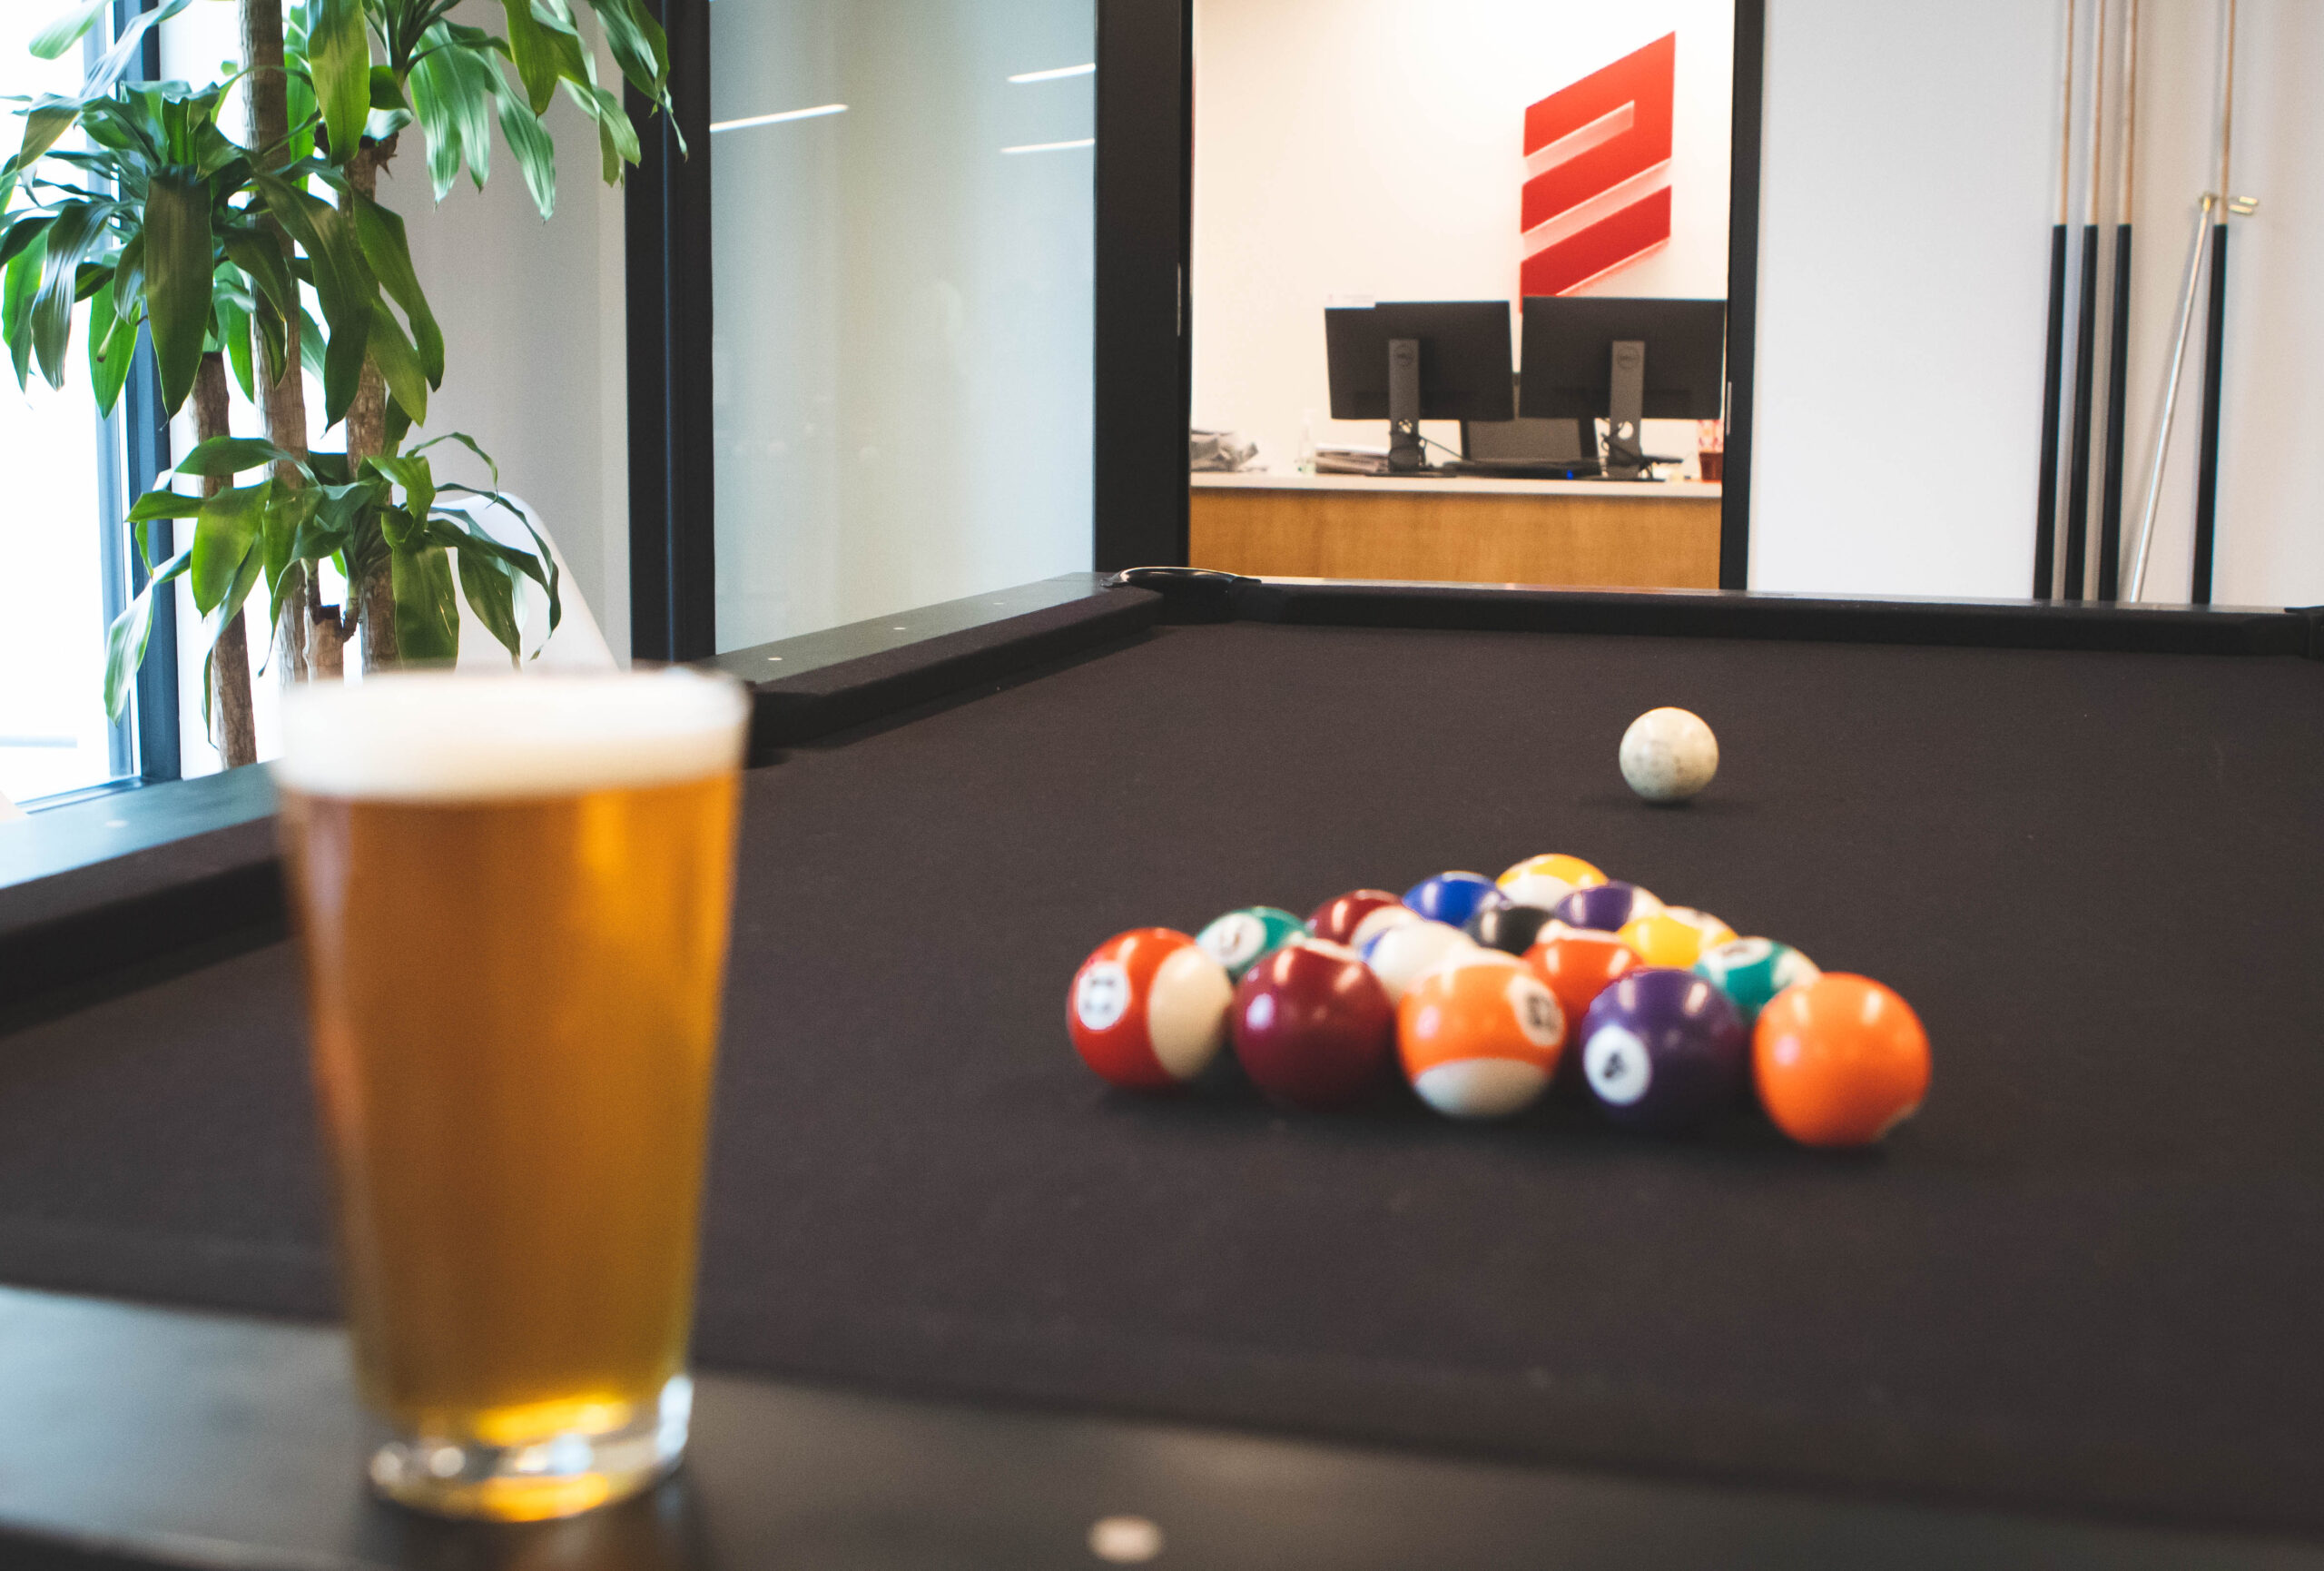 Photo of pint of beer and pool table with pint out of focus, beer glasses in focus, ELITE Transit Solutions E logo in the background.